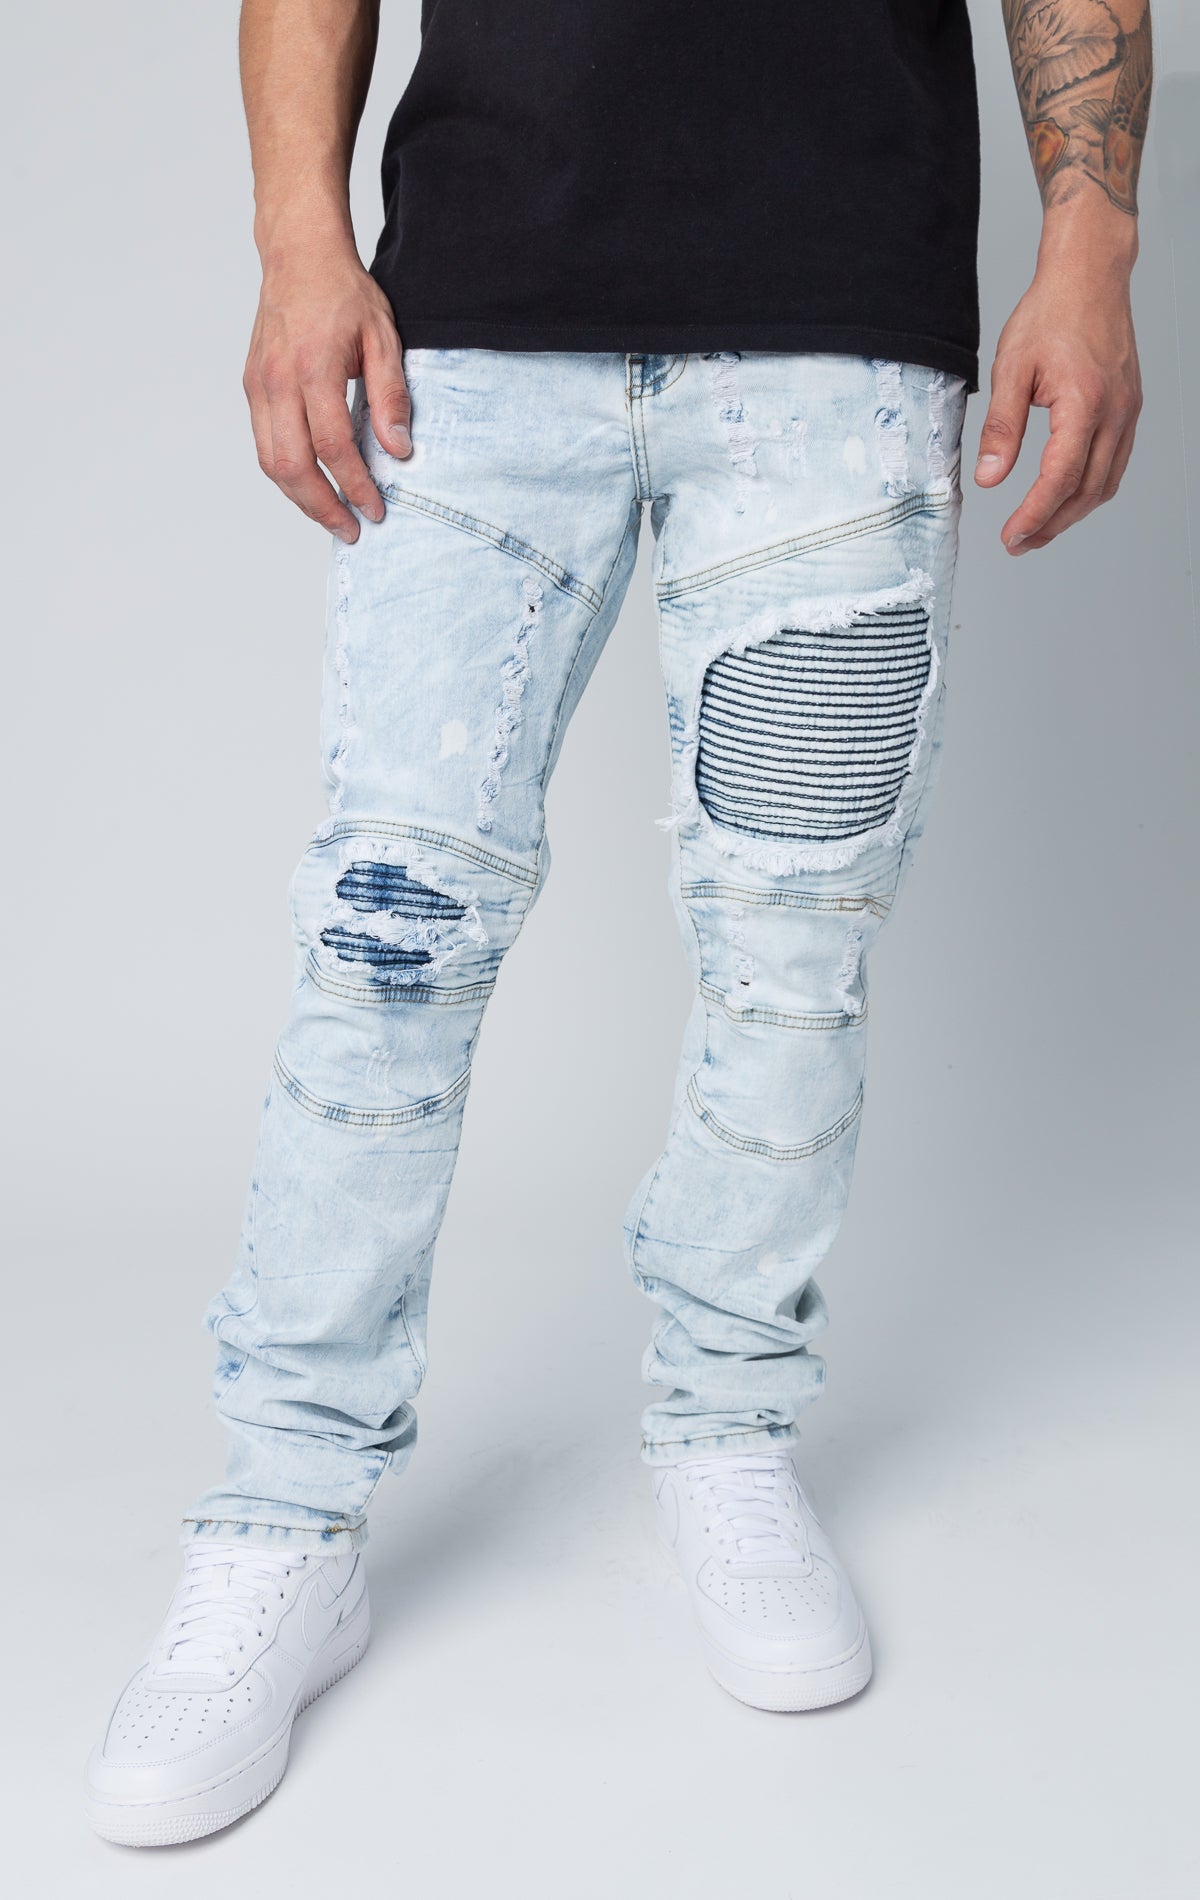 Denim ripped pants in ice blue